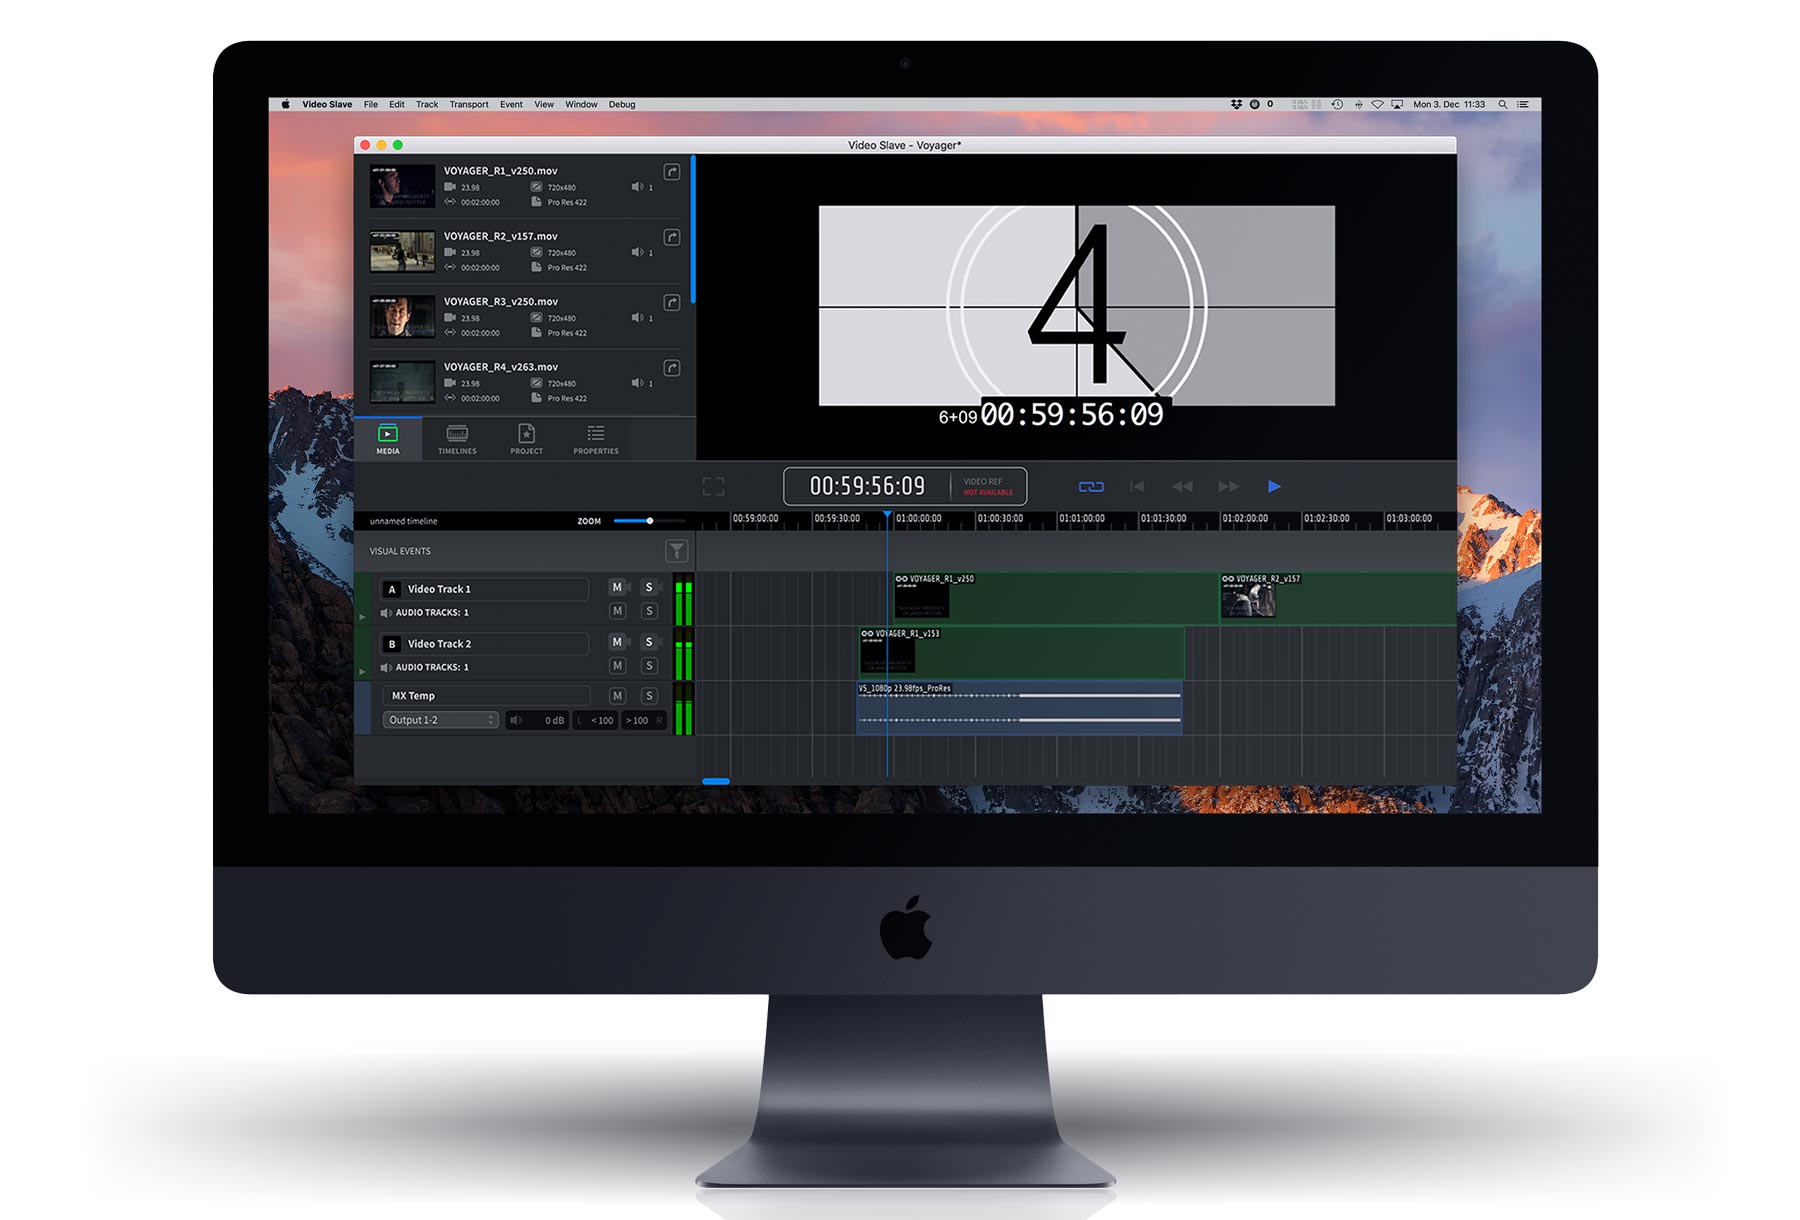 New Software Review: Video Slave 4 Pro by Non-Lethal Applications